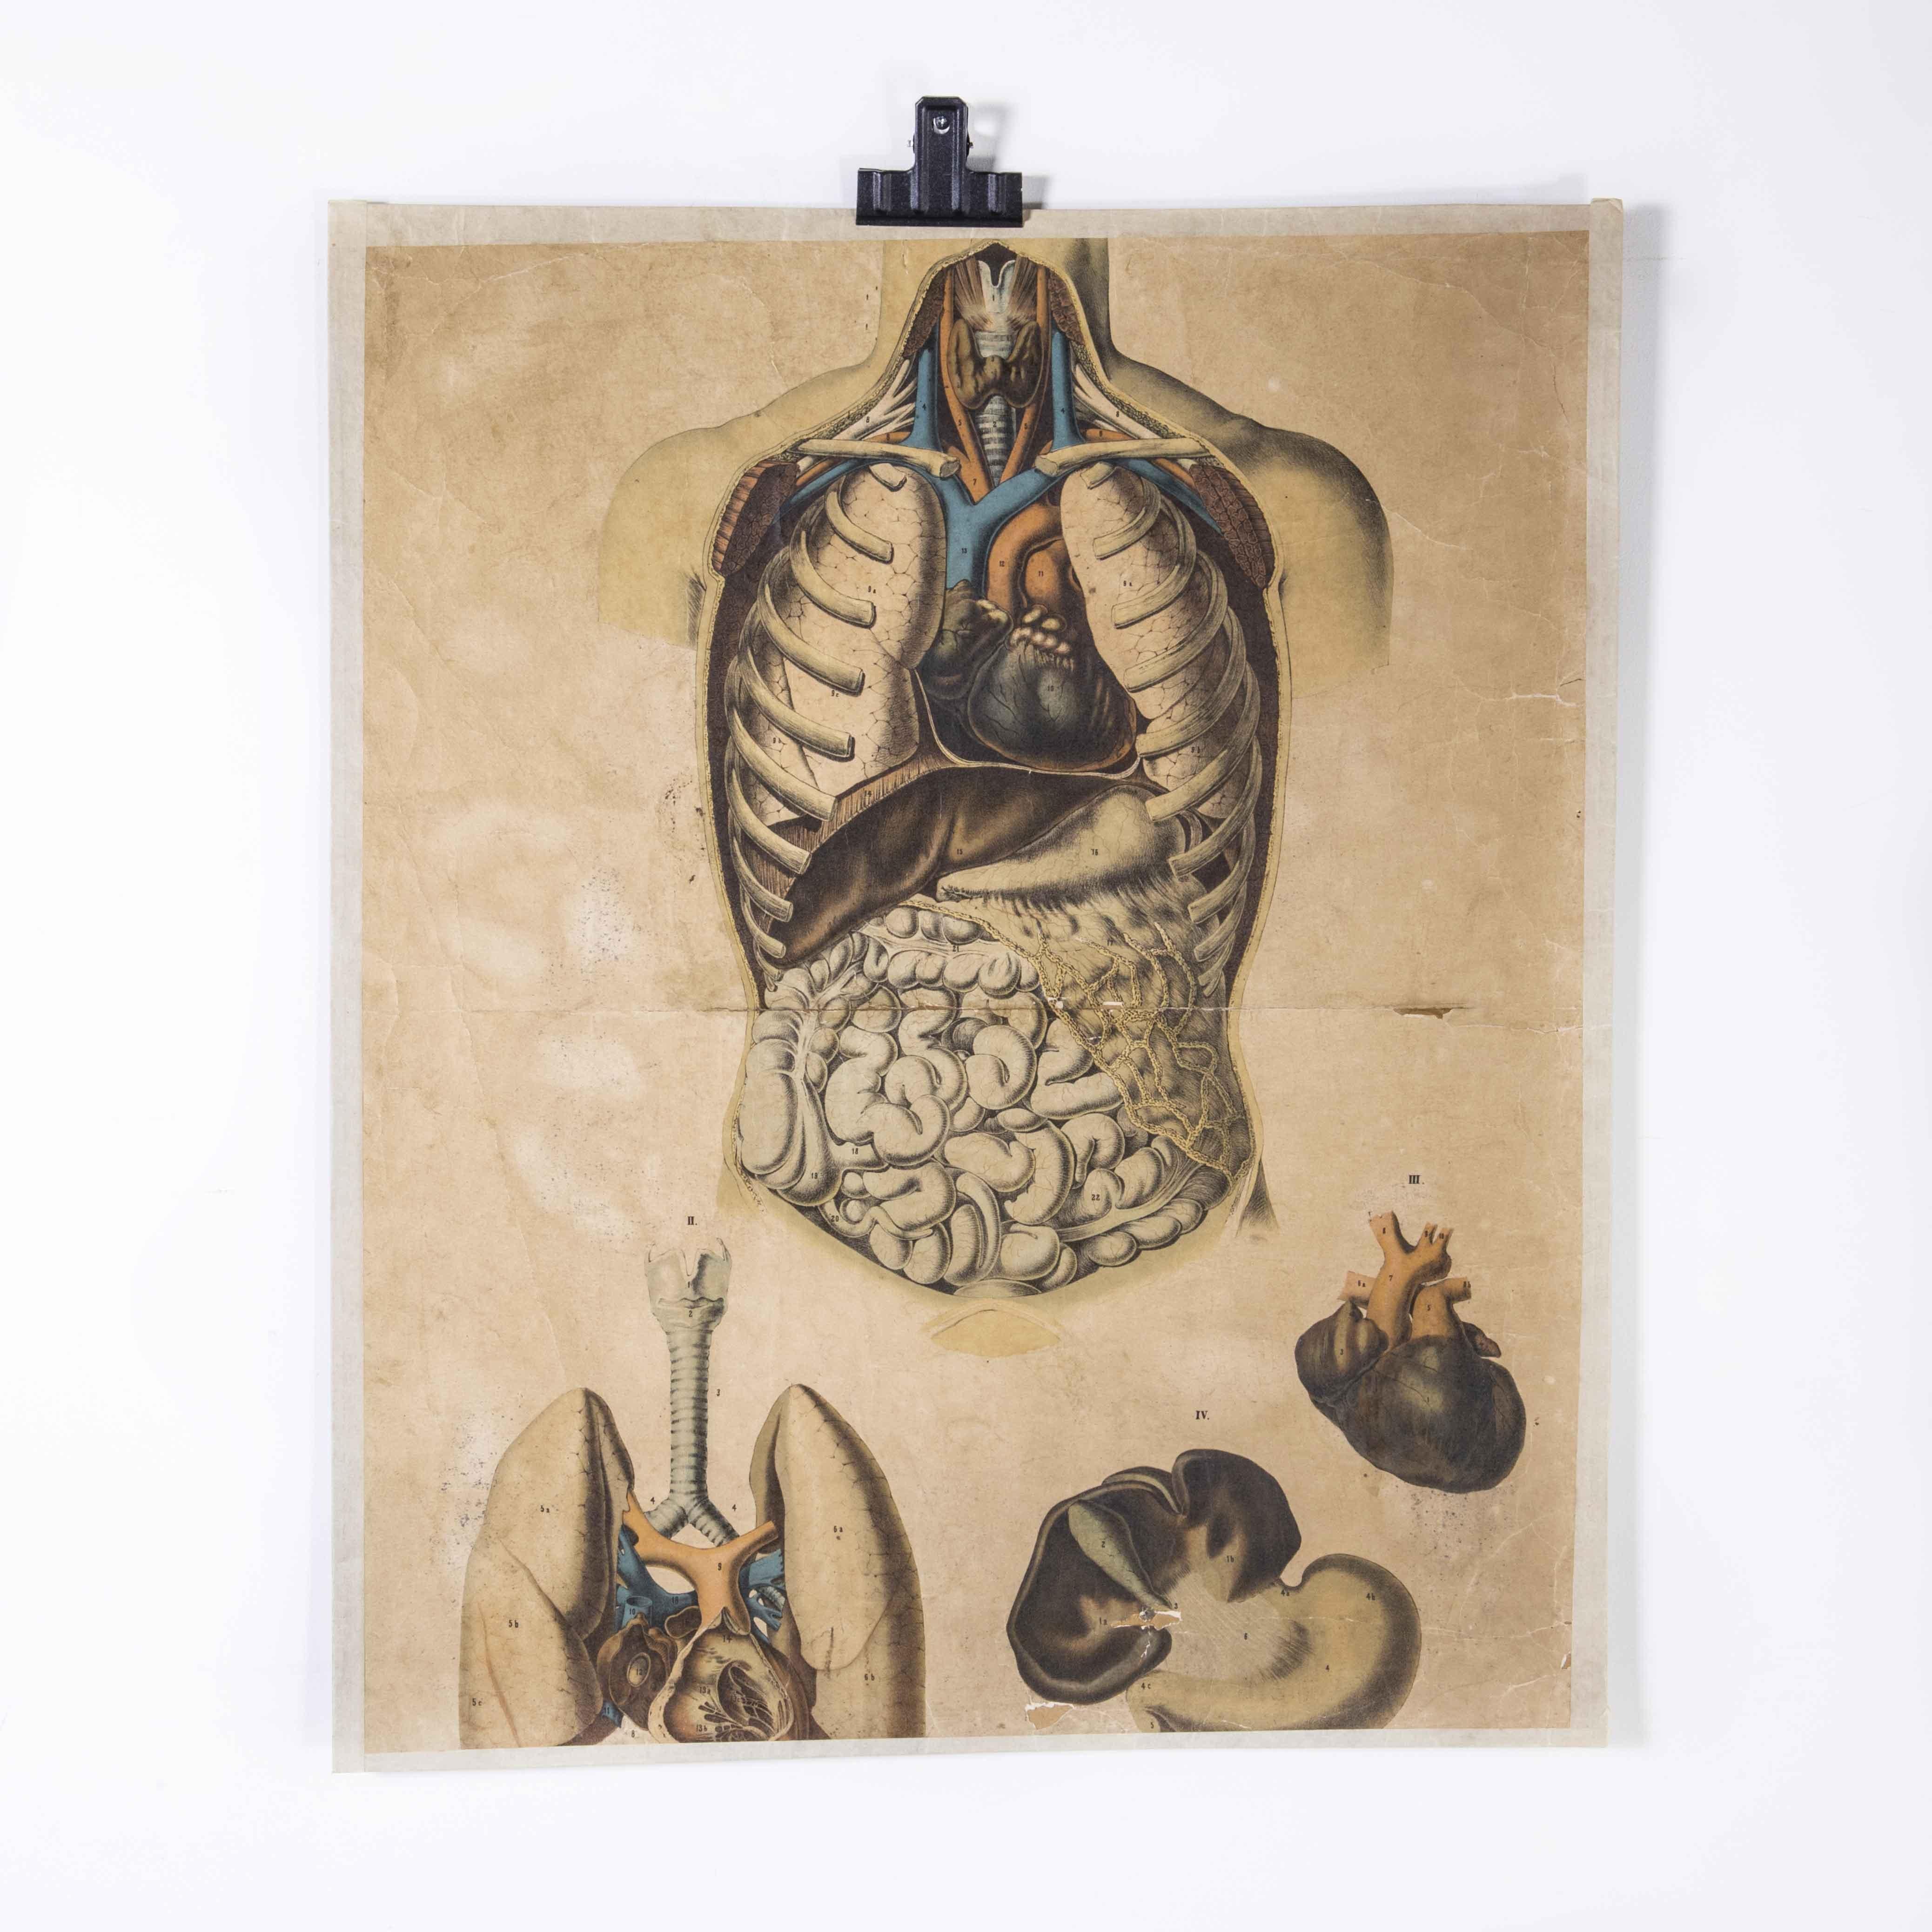 Early 20th century human vital organs educational poster
Early 20th century human vital organs educational poster. Early 20th century Czechoslovakian educational human anatomy chart. A rare and vintage wall chart from the Czech Republic